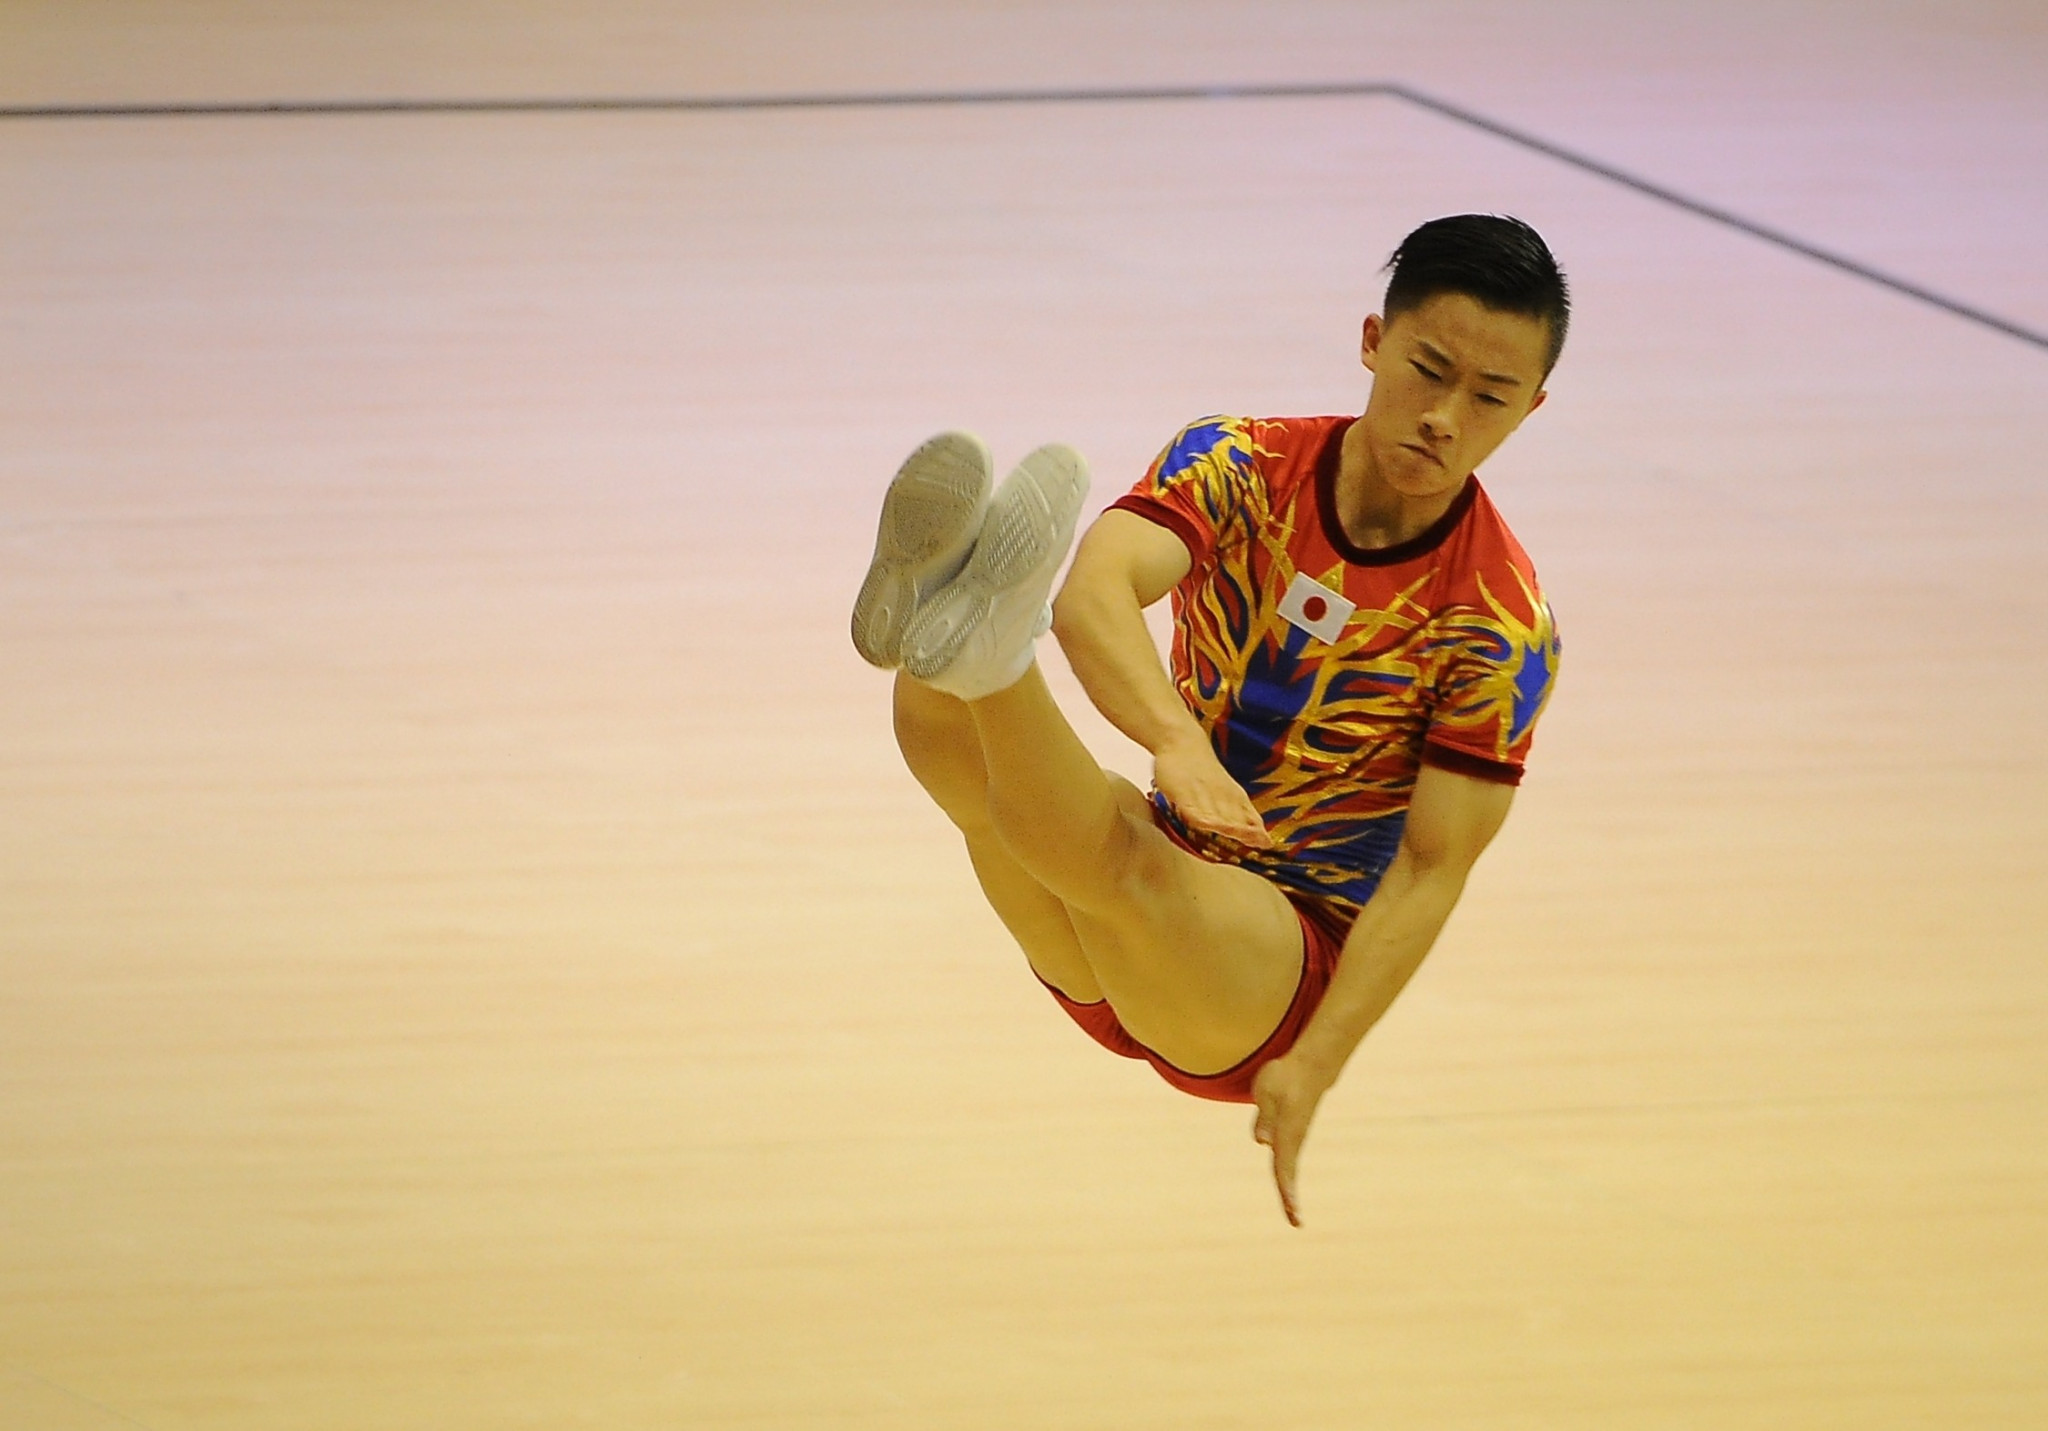 Double world champion Saito looks to delight home crowd at FIG Aerobic World Cup